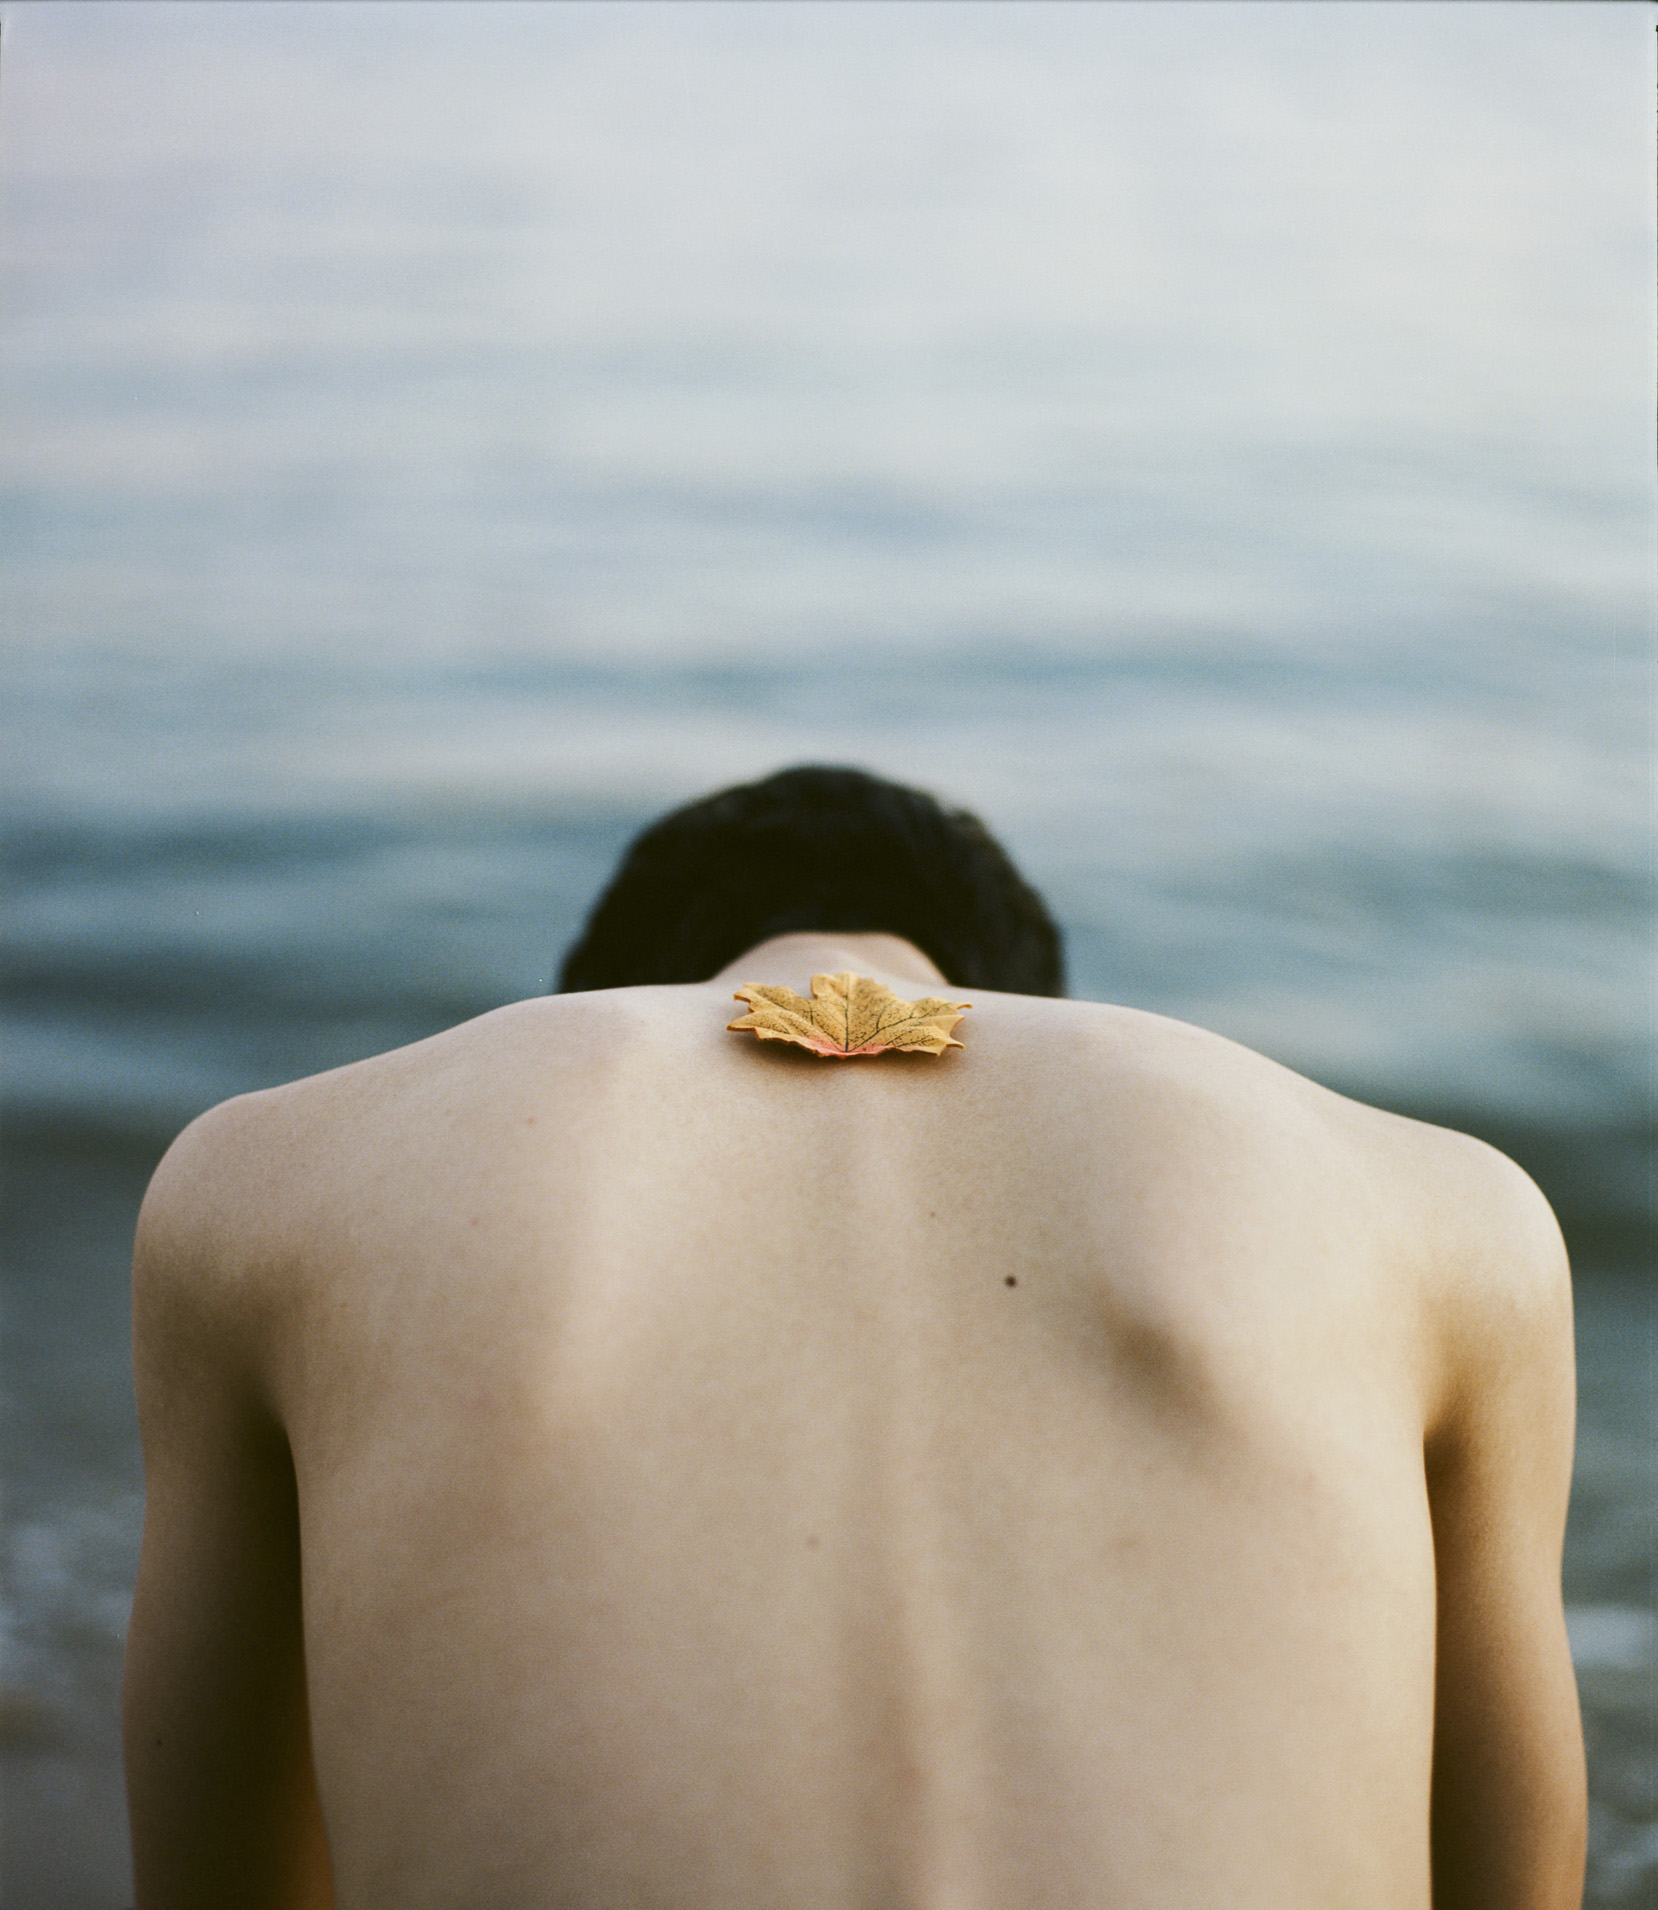 A leaf resting on the back of person wearing no shirt